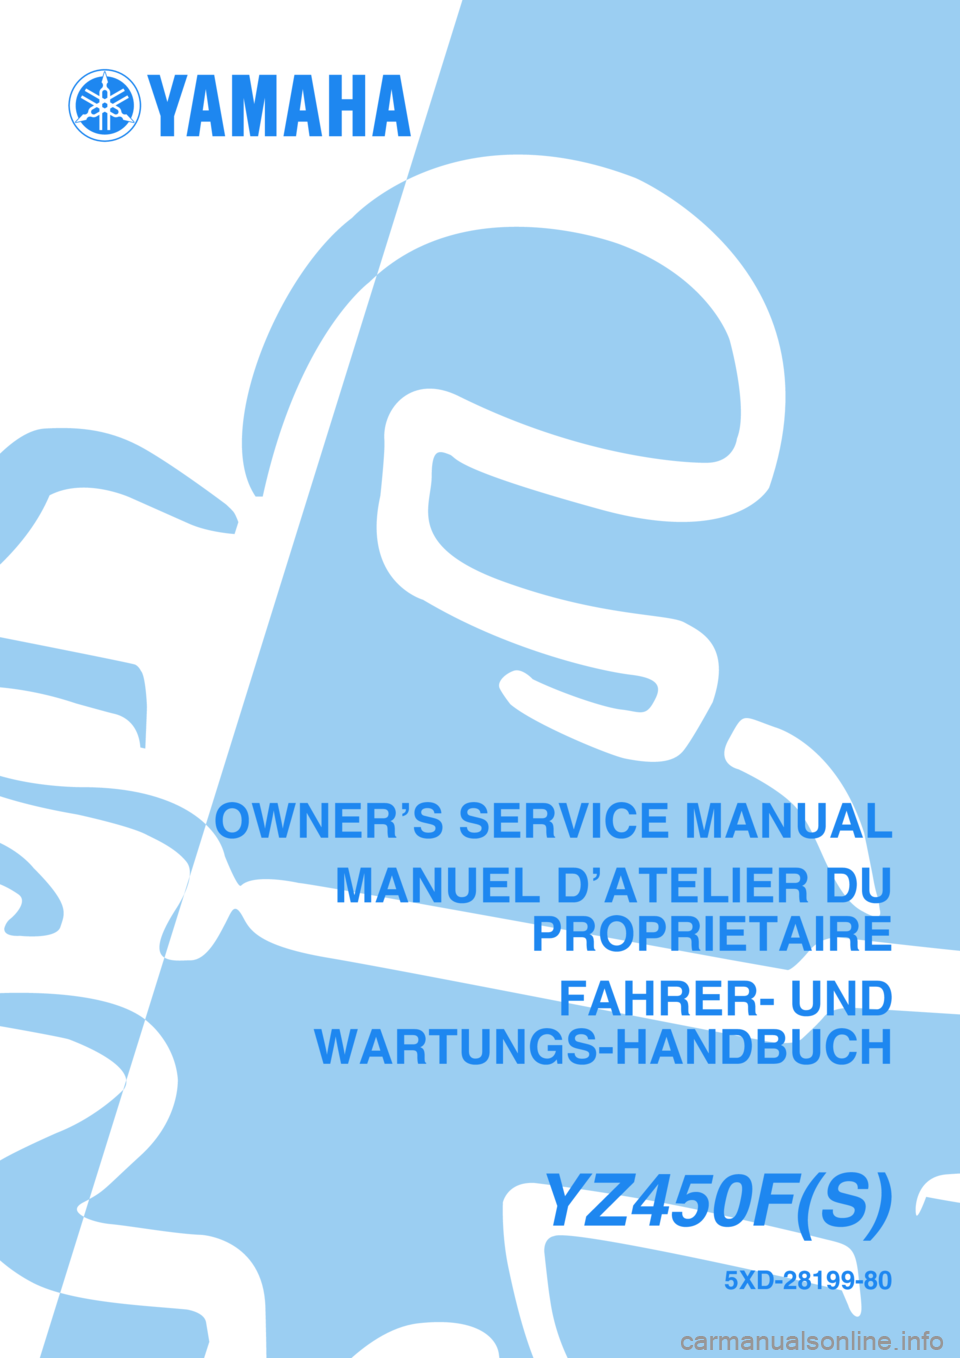 YAMAHA YZ450F 2004  Notices Demploi (in French) 5XD-28199-80
YZ450F(S)
OWNER’S SERVICE MANUAL
MANUEL D’ATELIER DU
PROPRIETAIRE
FAHRER- UND
WARTUNGS-HANDBUCH 